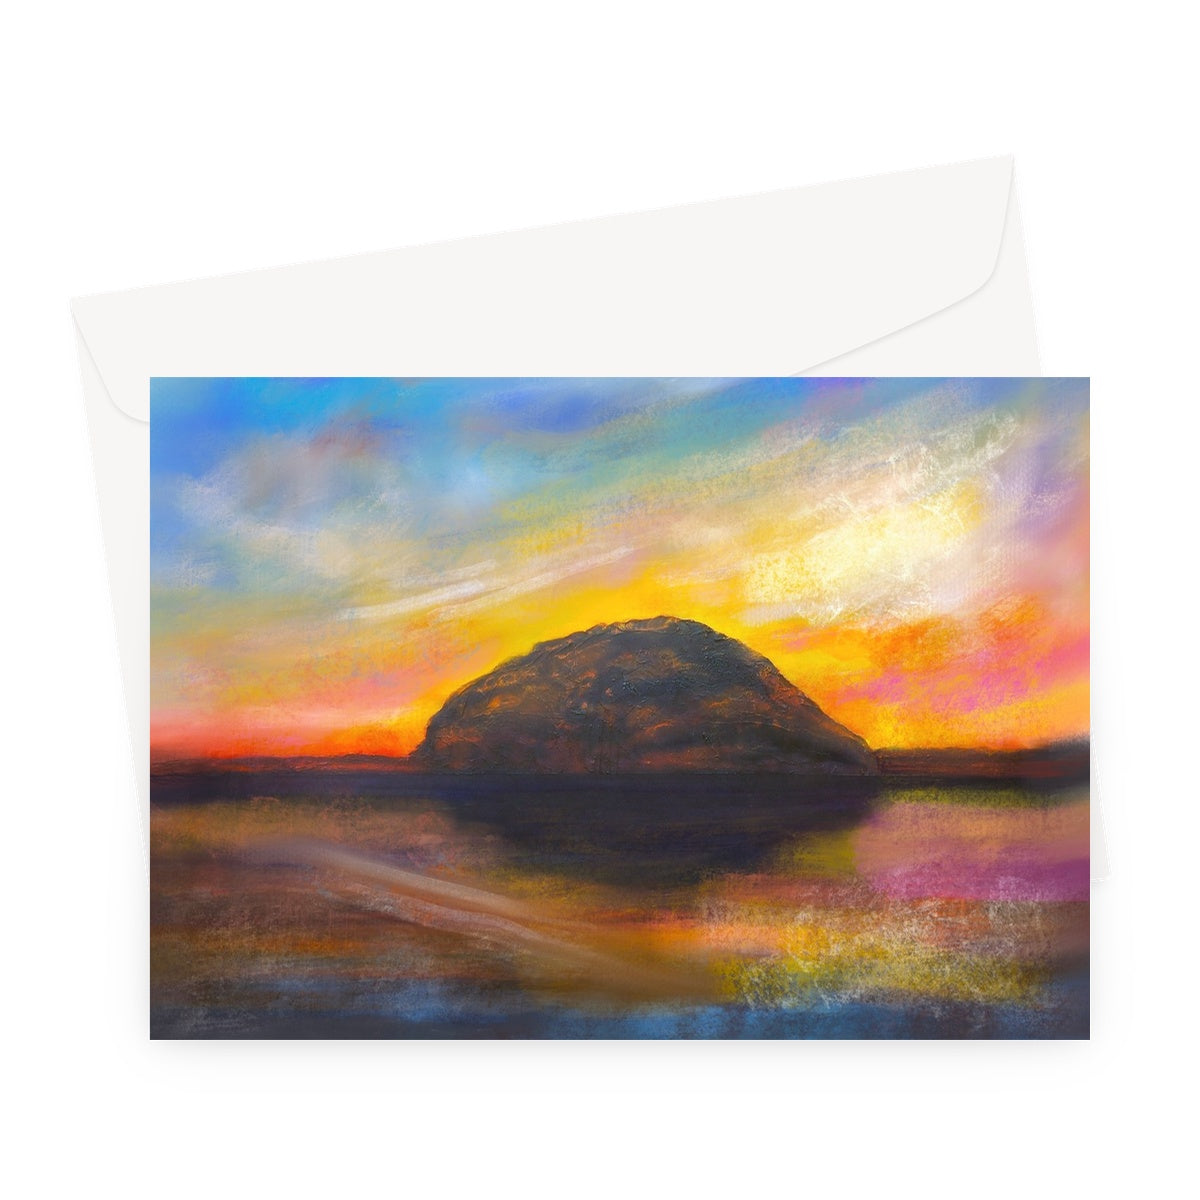 Ailsa Craig Dusk Arran Art Gifts Greeting Card-Greetings Cards-Arran Art Gallery-A5 Landscape-1 Card-Paintings, Prints, Homeware, Art Gifts From Scotland By Scottish Artist Kevin Hunter